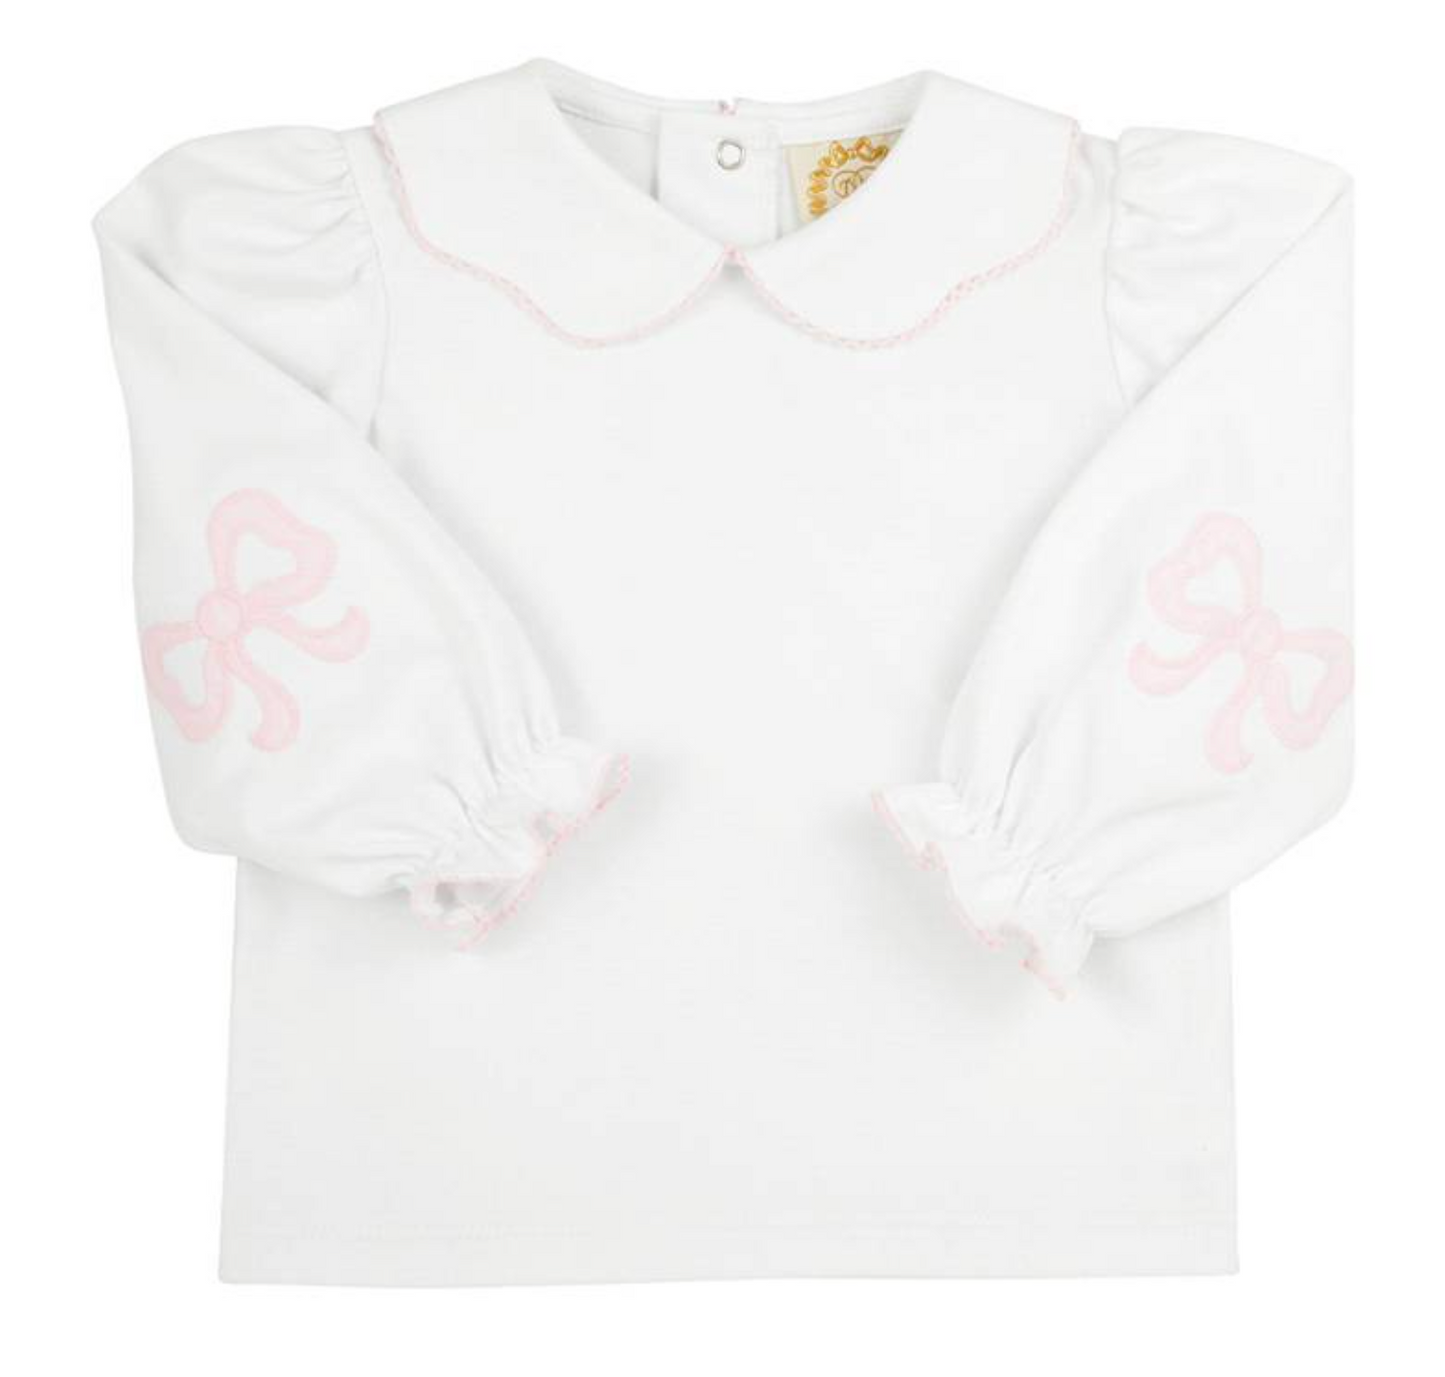 Emma's Elbow Patch Top & Onesie- Worth Ave White with Palm Beach Pink